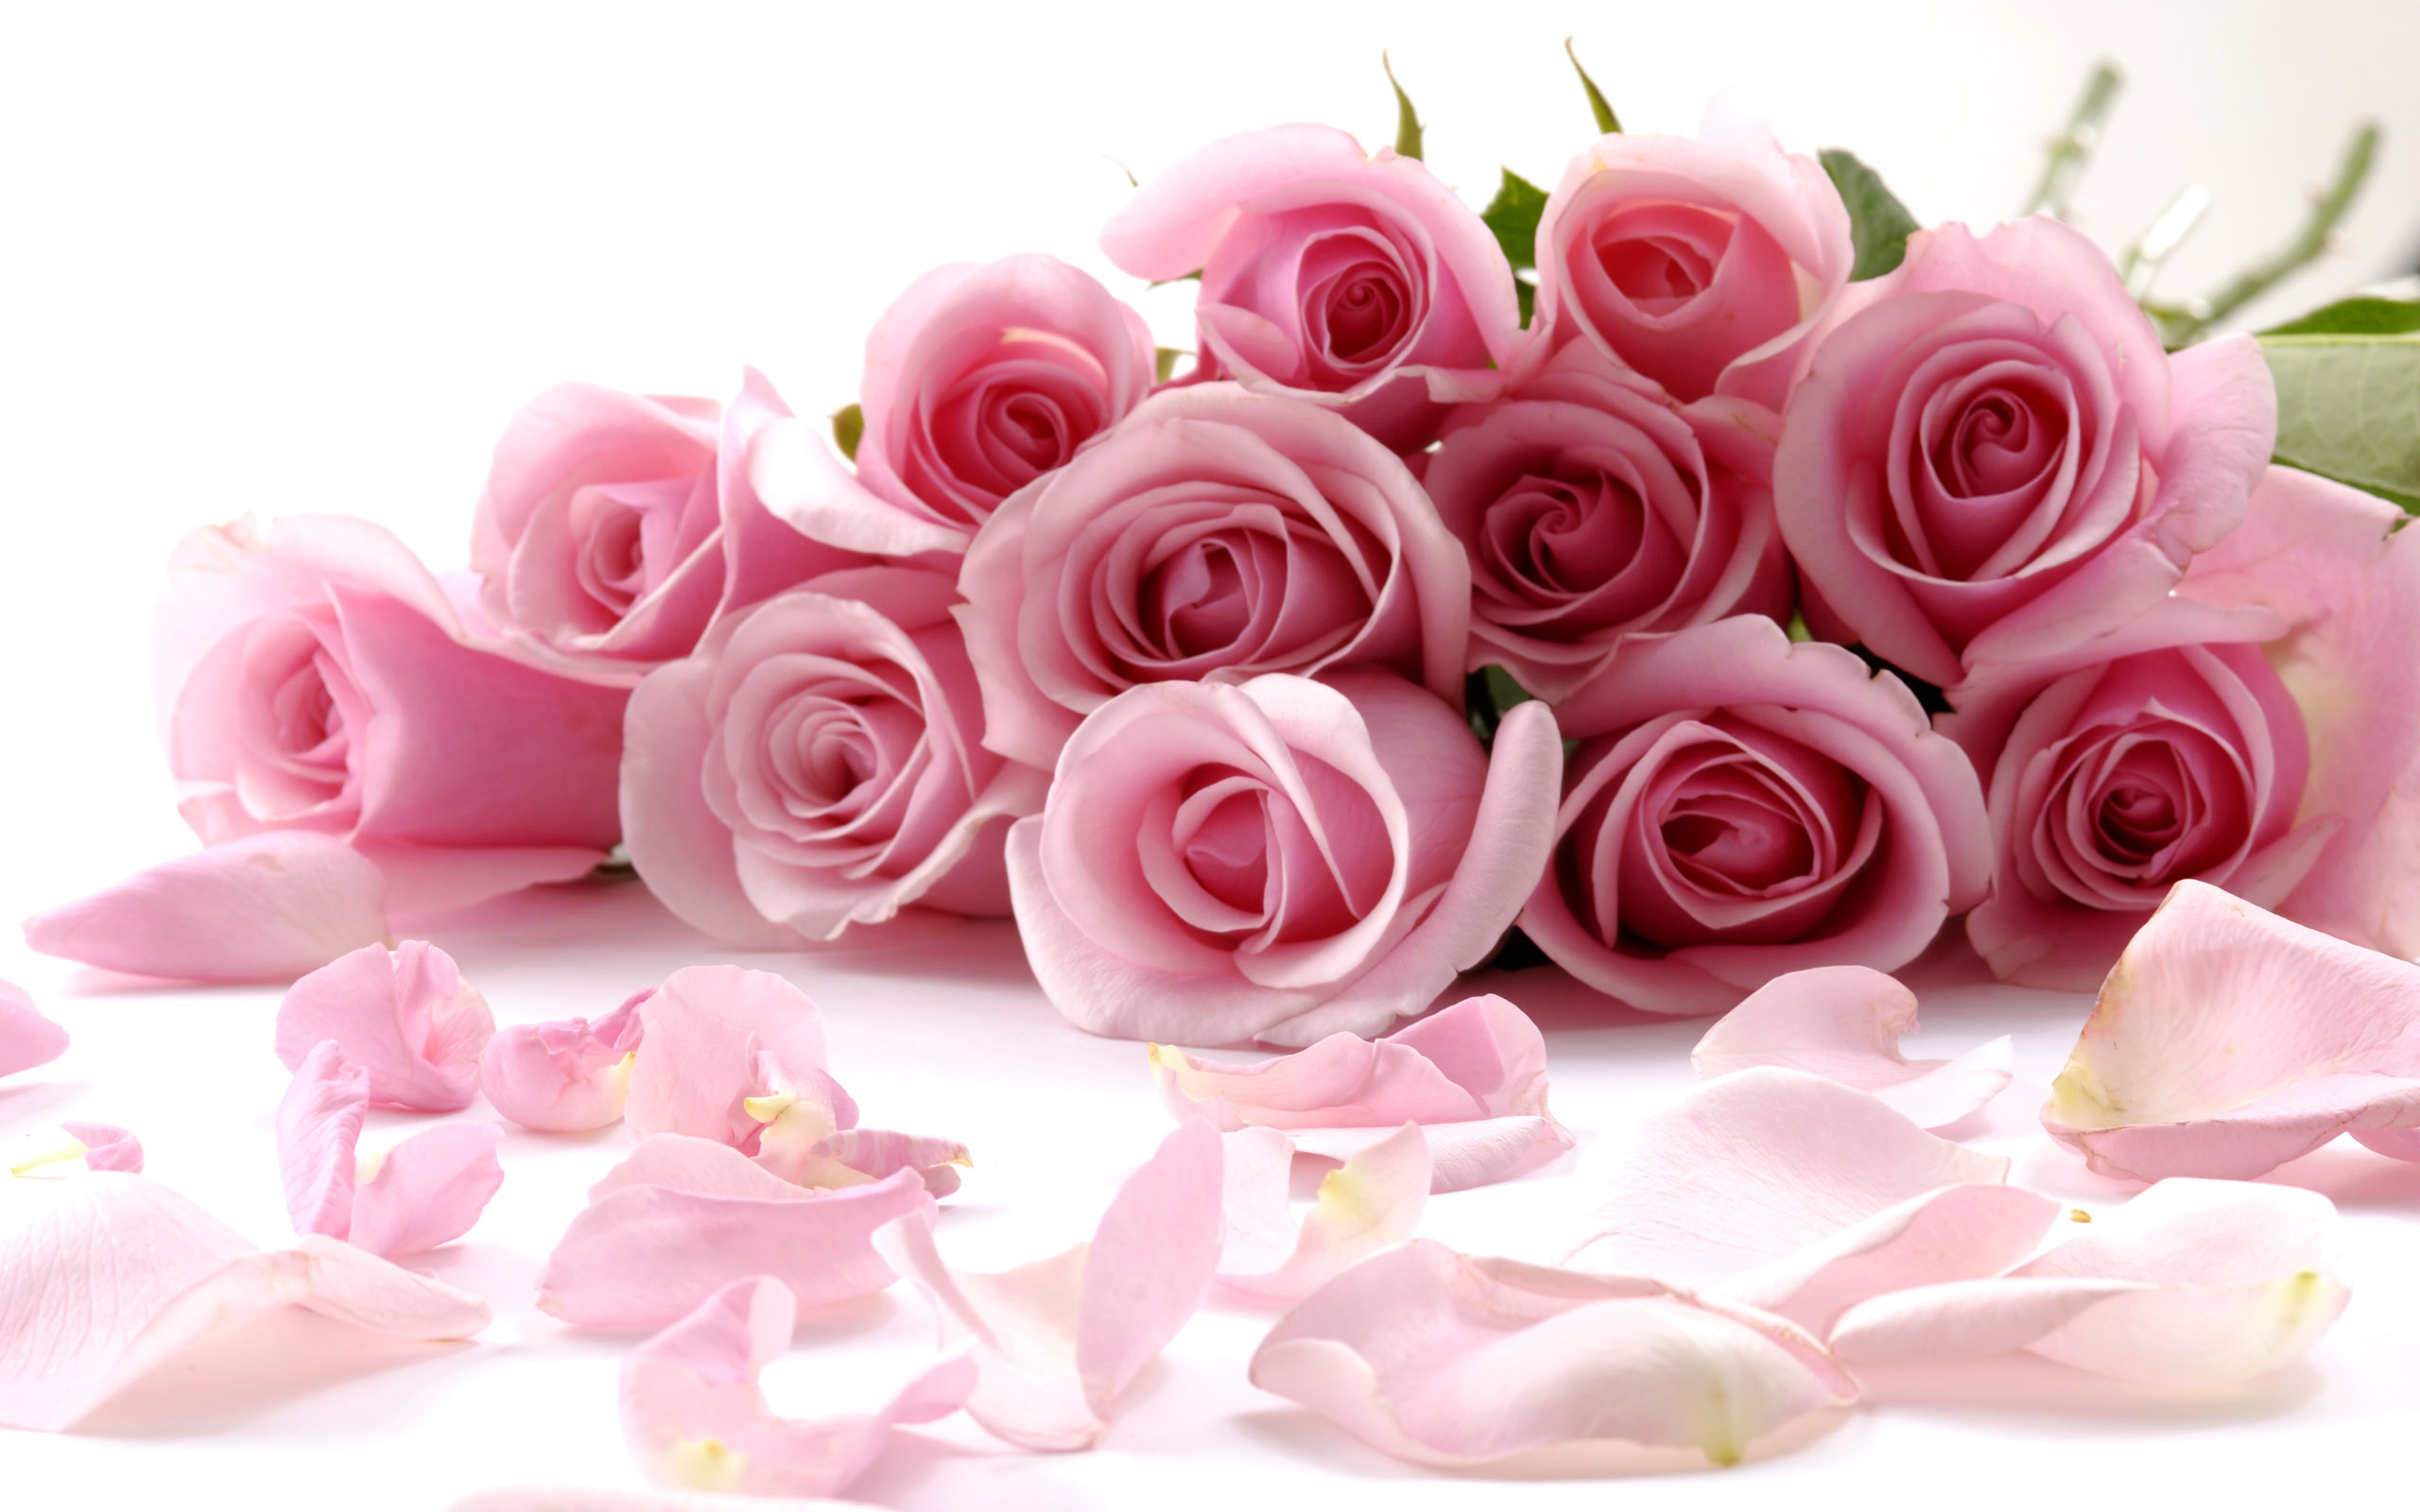 Pink roses Stock Photos Royalty Free Pink roses Images  Depositphotos